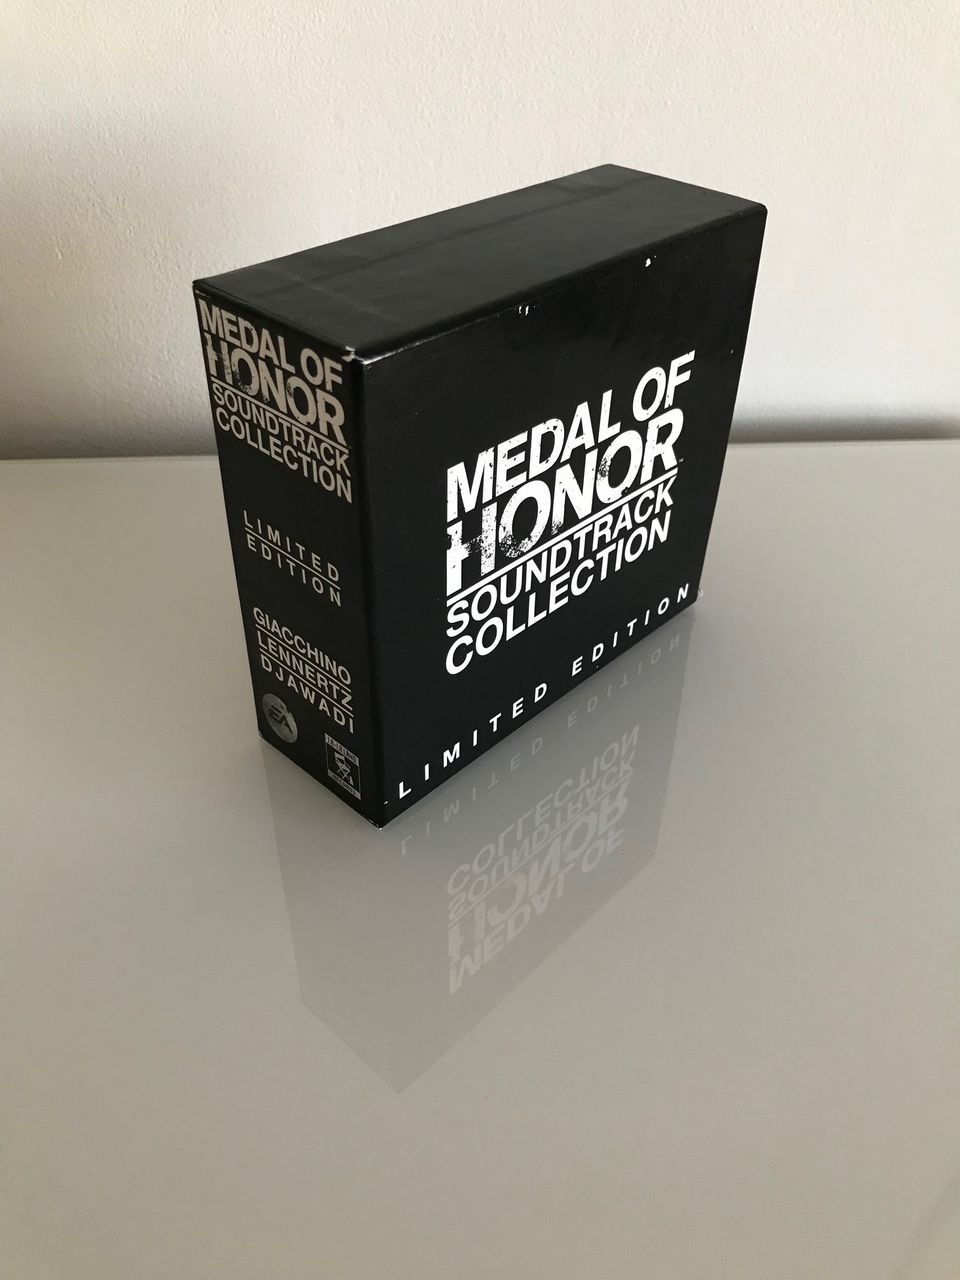 Medal Of Honor Soundtrack Collection Limited Edition